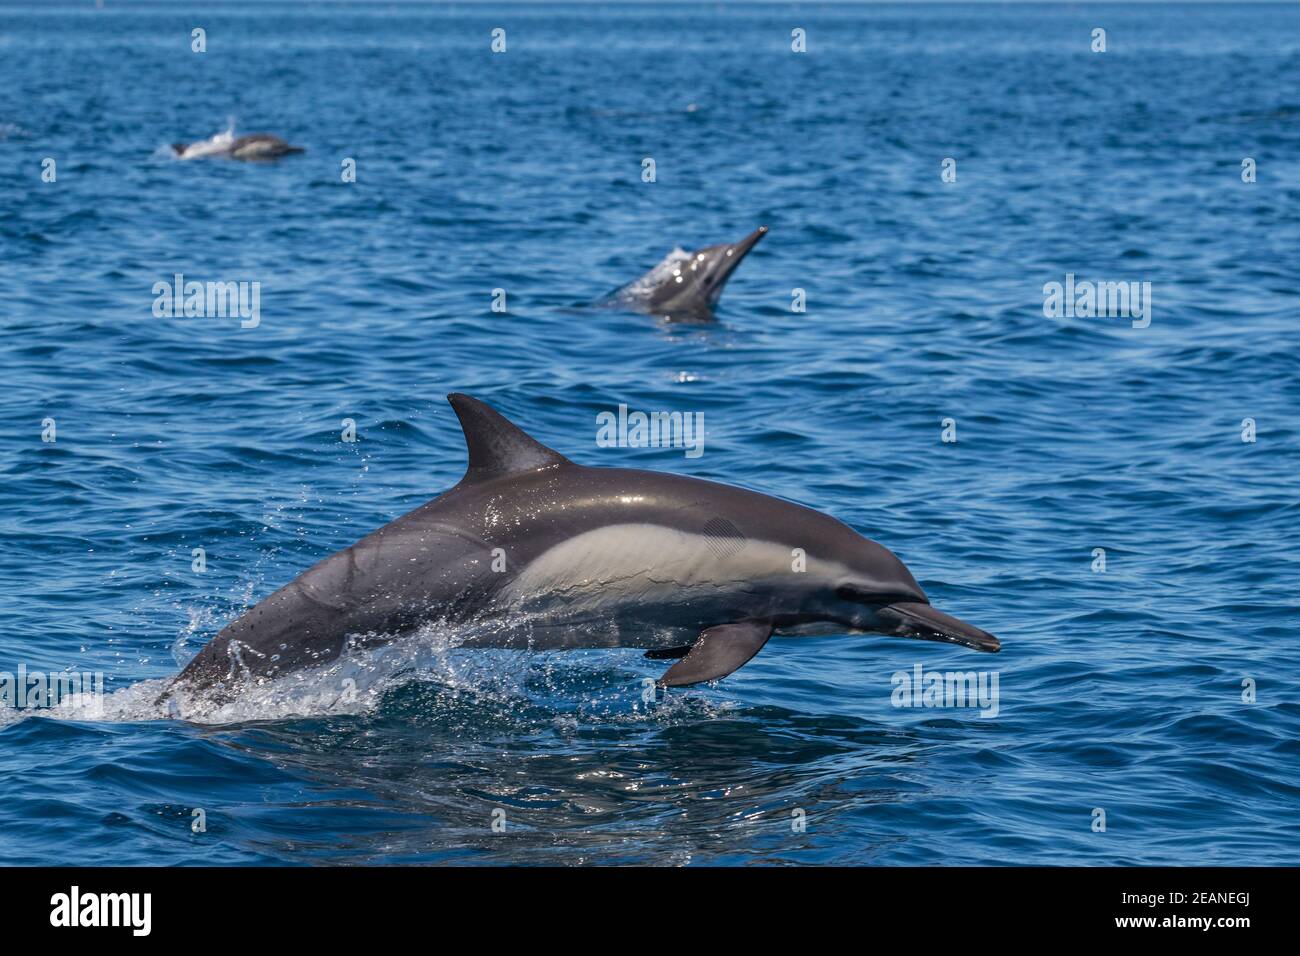 Adult long-beaked common dolphin (Delphinus capensis) leaping in Loreto Bay National Park, Baja California Sur, Mexico, North America Stock Photo